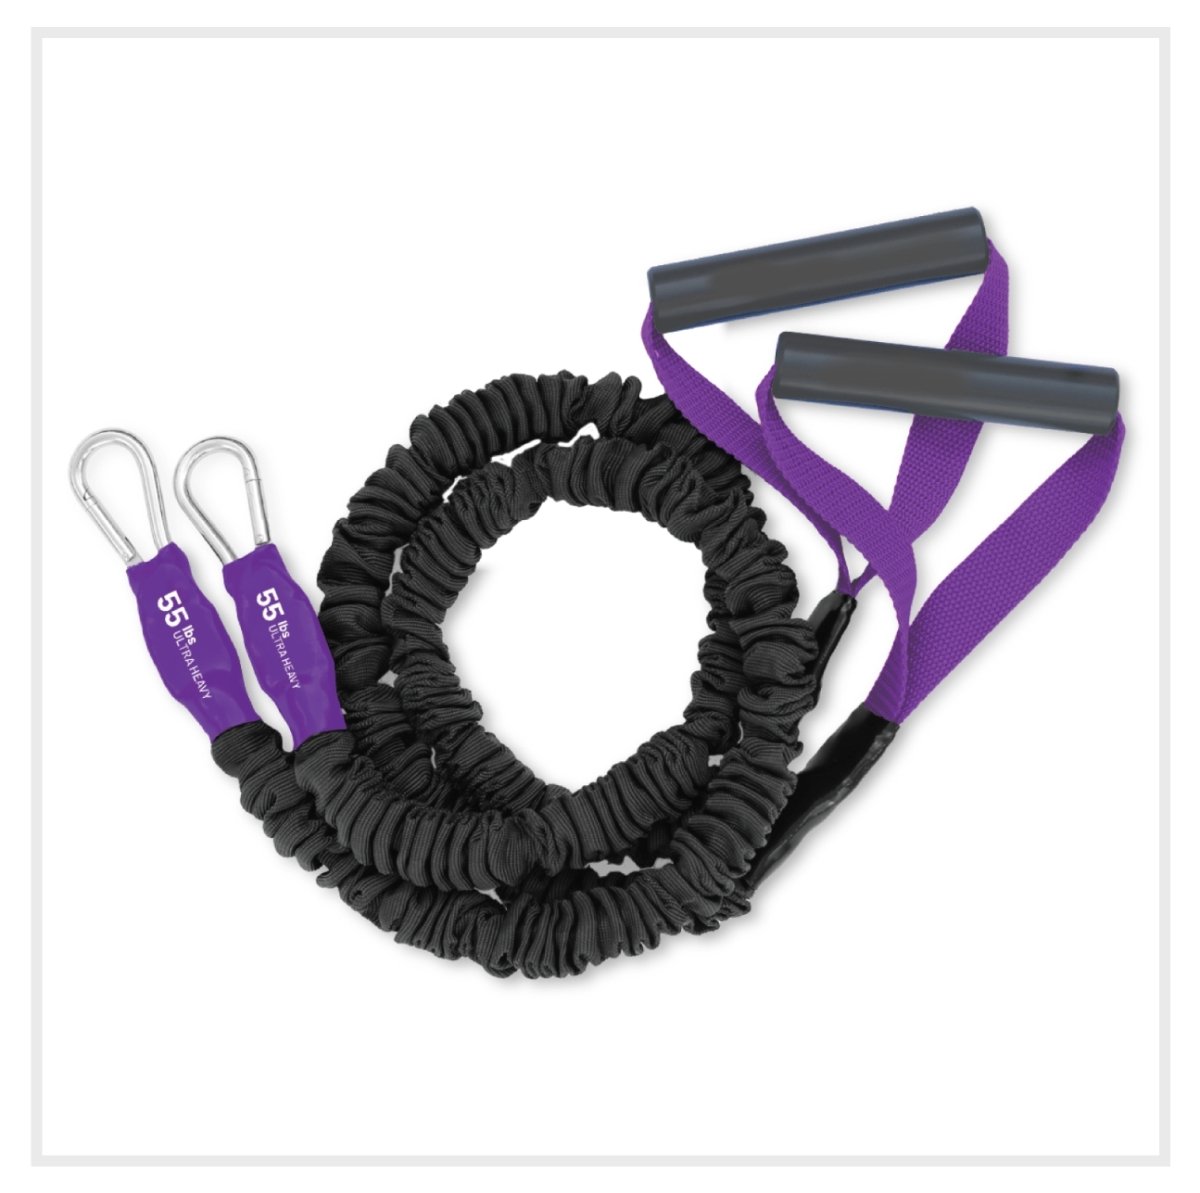 X-Over Resistance Bands   3-Pack (25lb/40lb/55lbs)